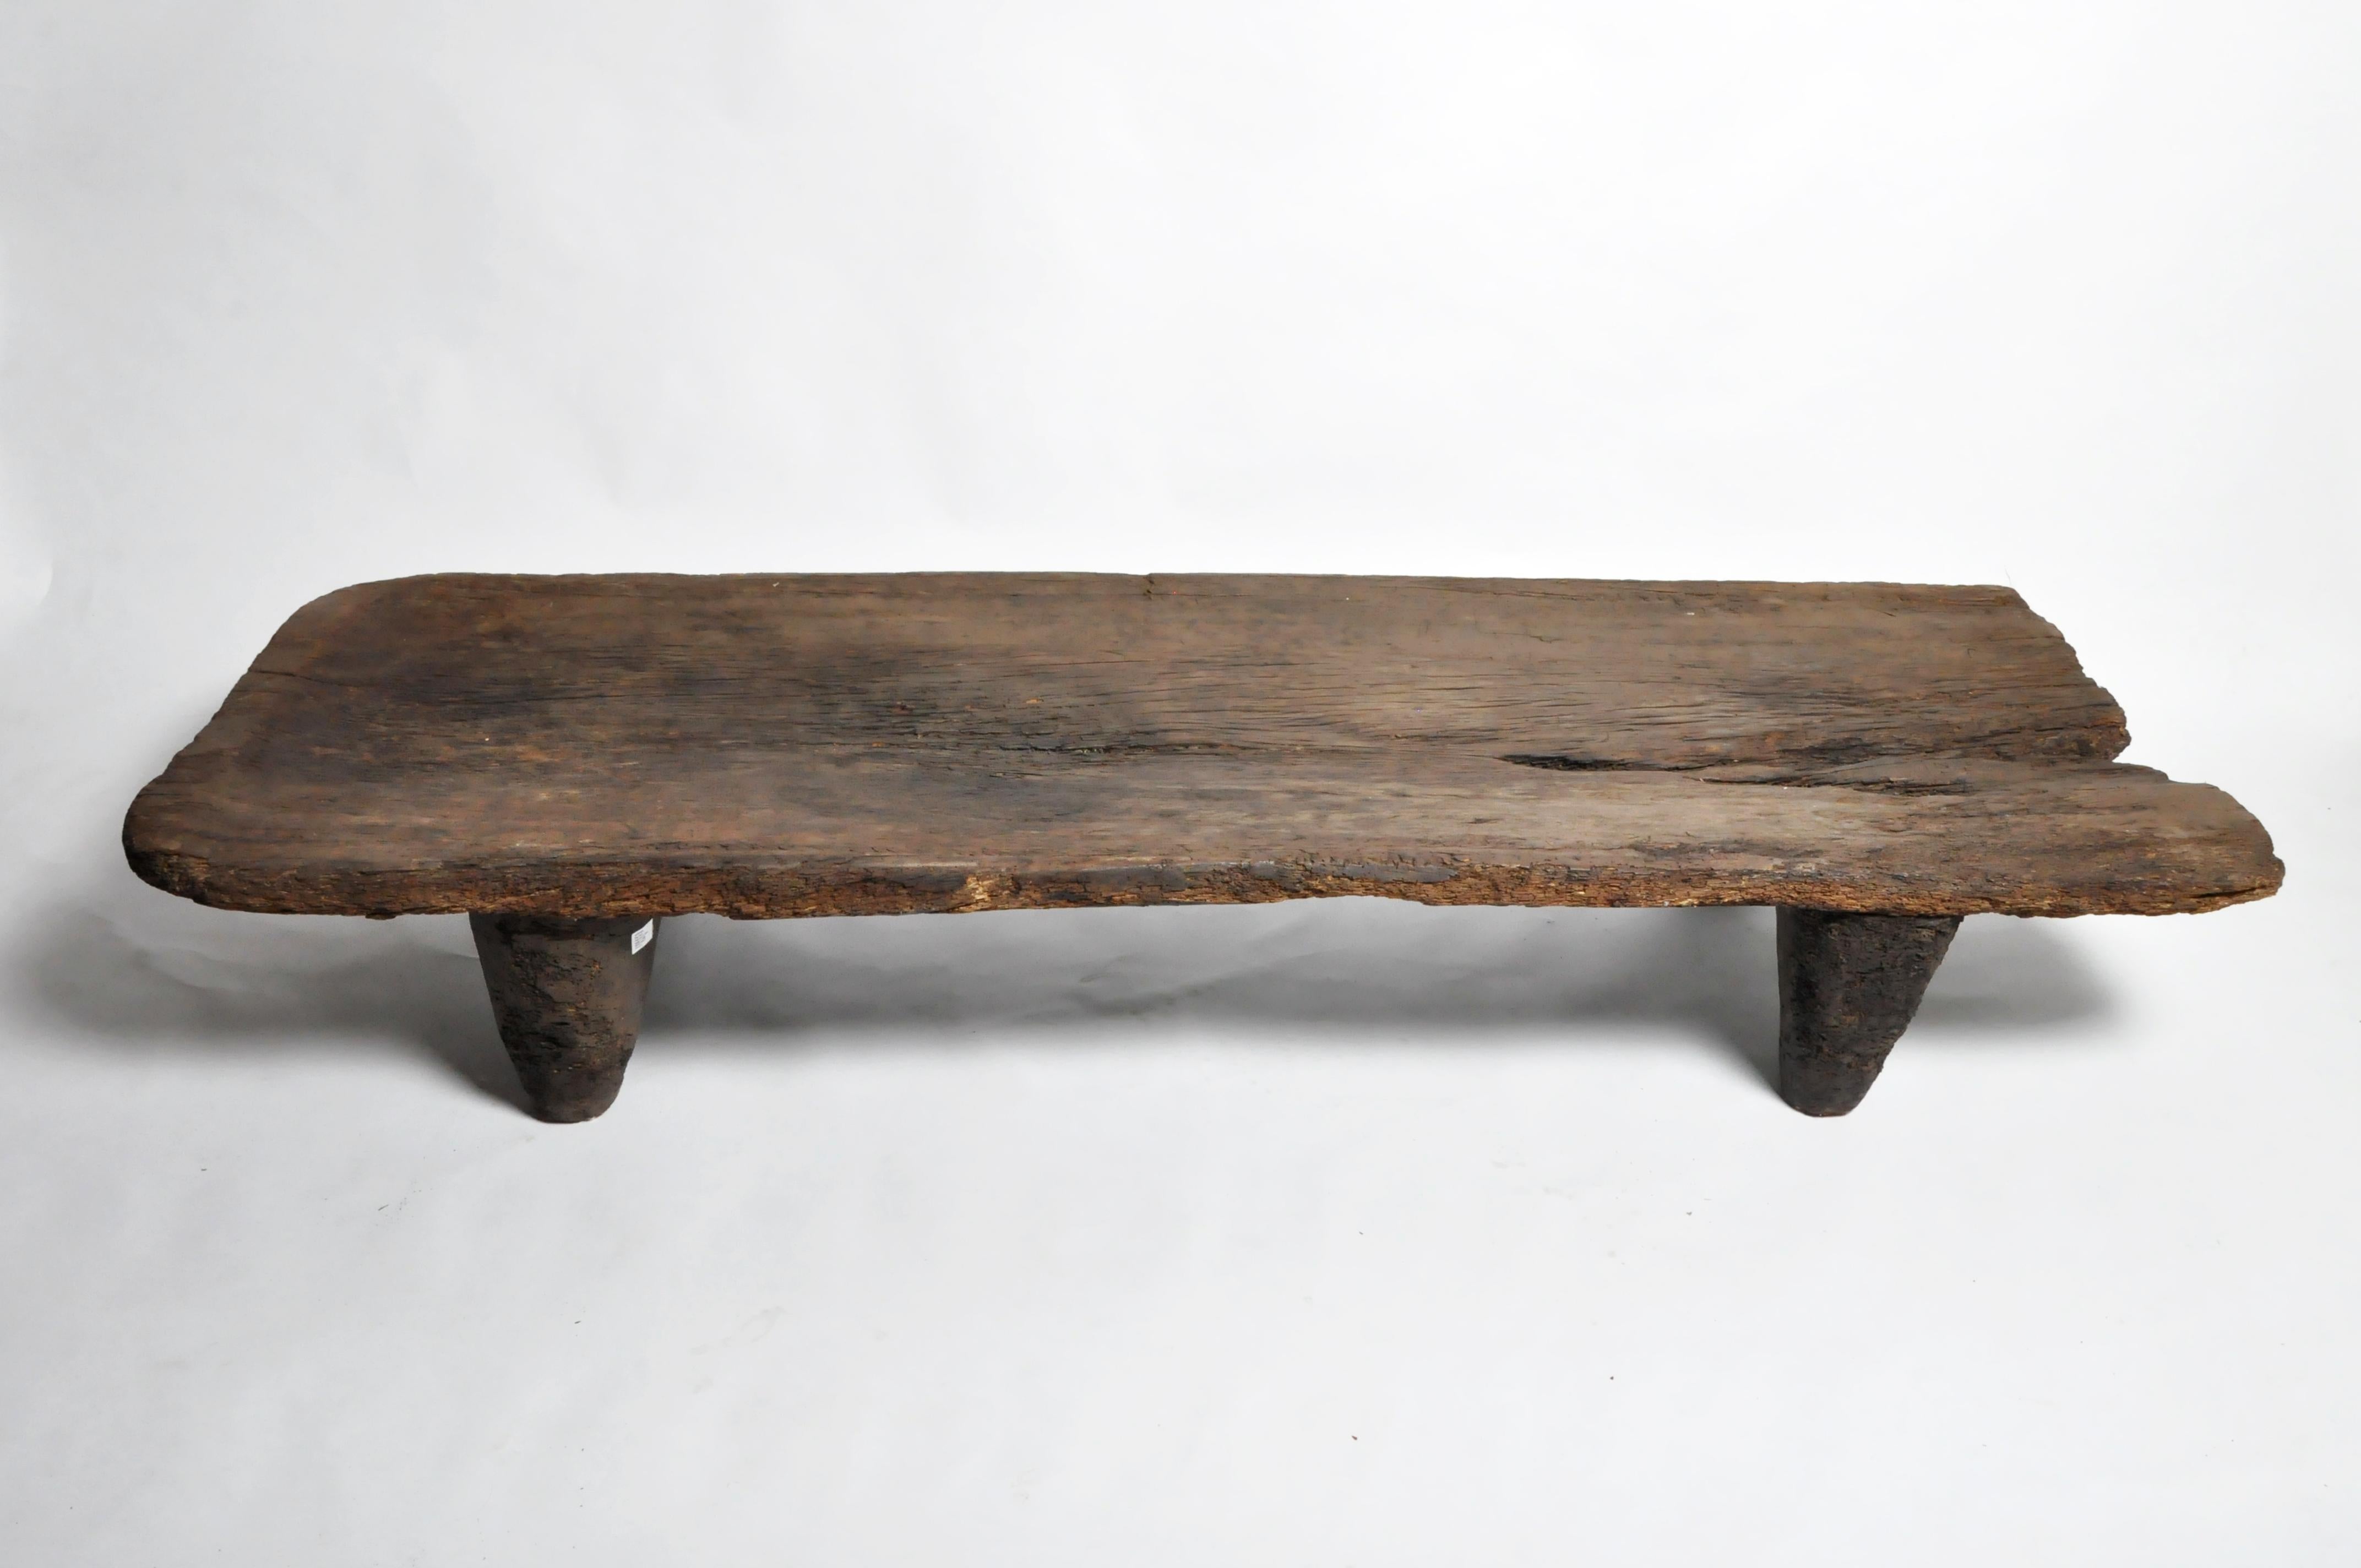 The Naga tribesman slept on elevated wooden beds to keep off the moist earth in their huts. Like most Naga artifacts, this bed is carved from a single piece of wood, circa 20th century. Wear consistent with age and use.
 